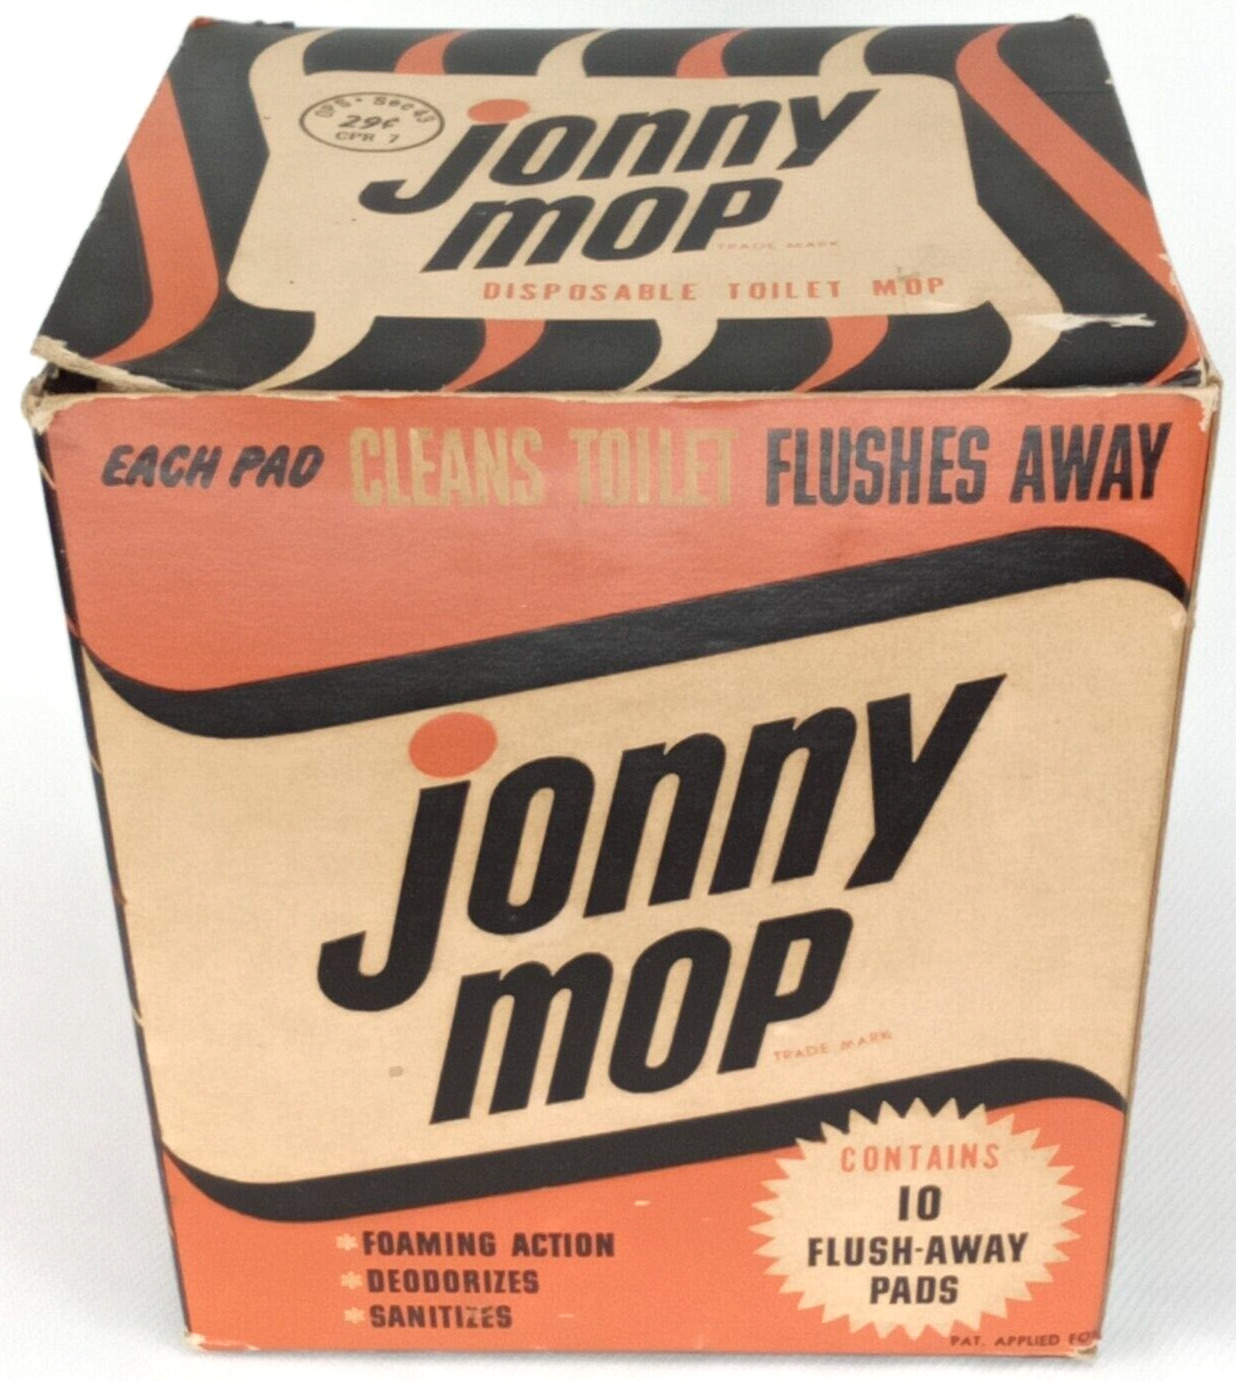 Jonny Mop Flush Away Pads Cleaner With Original Box 1940s Old Stock Advertising